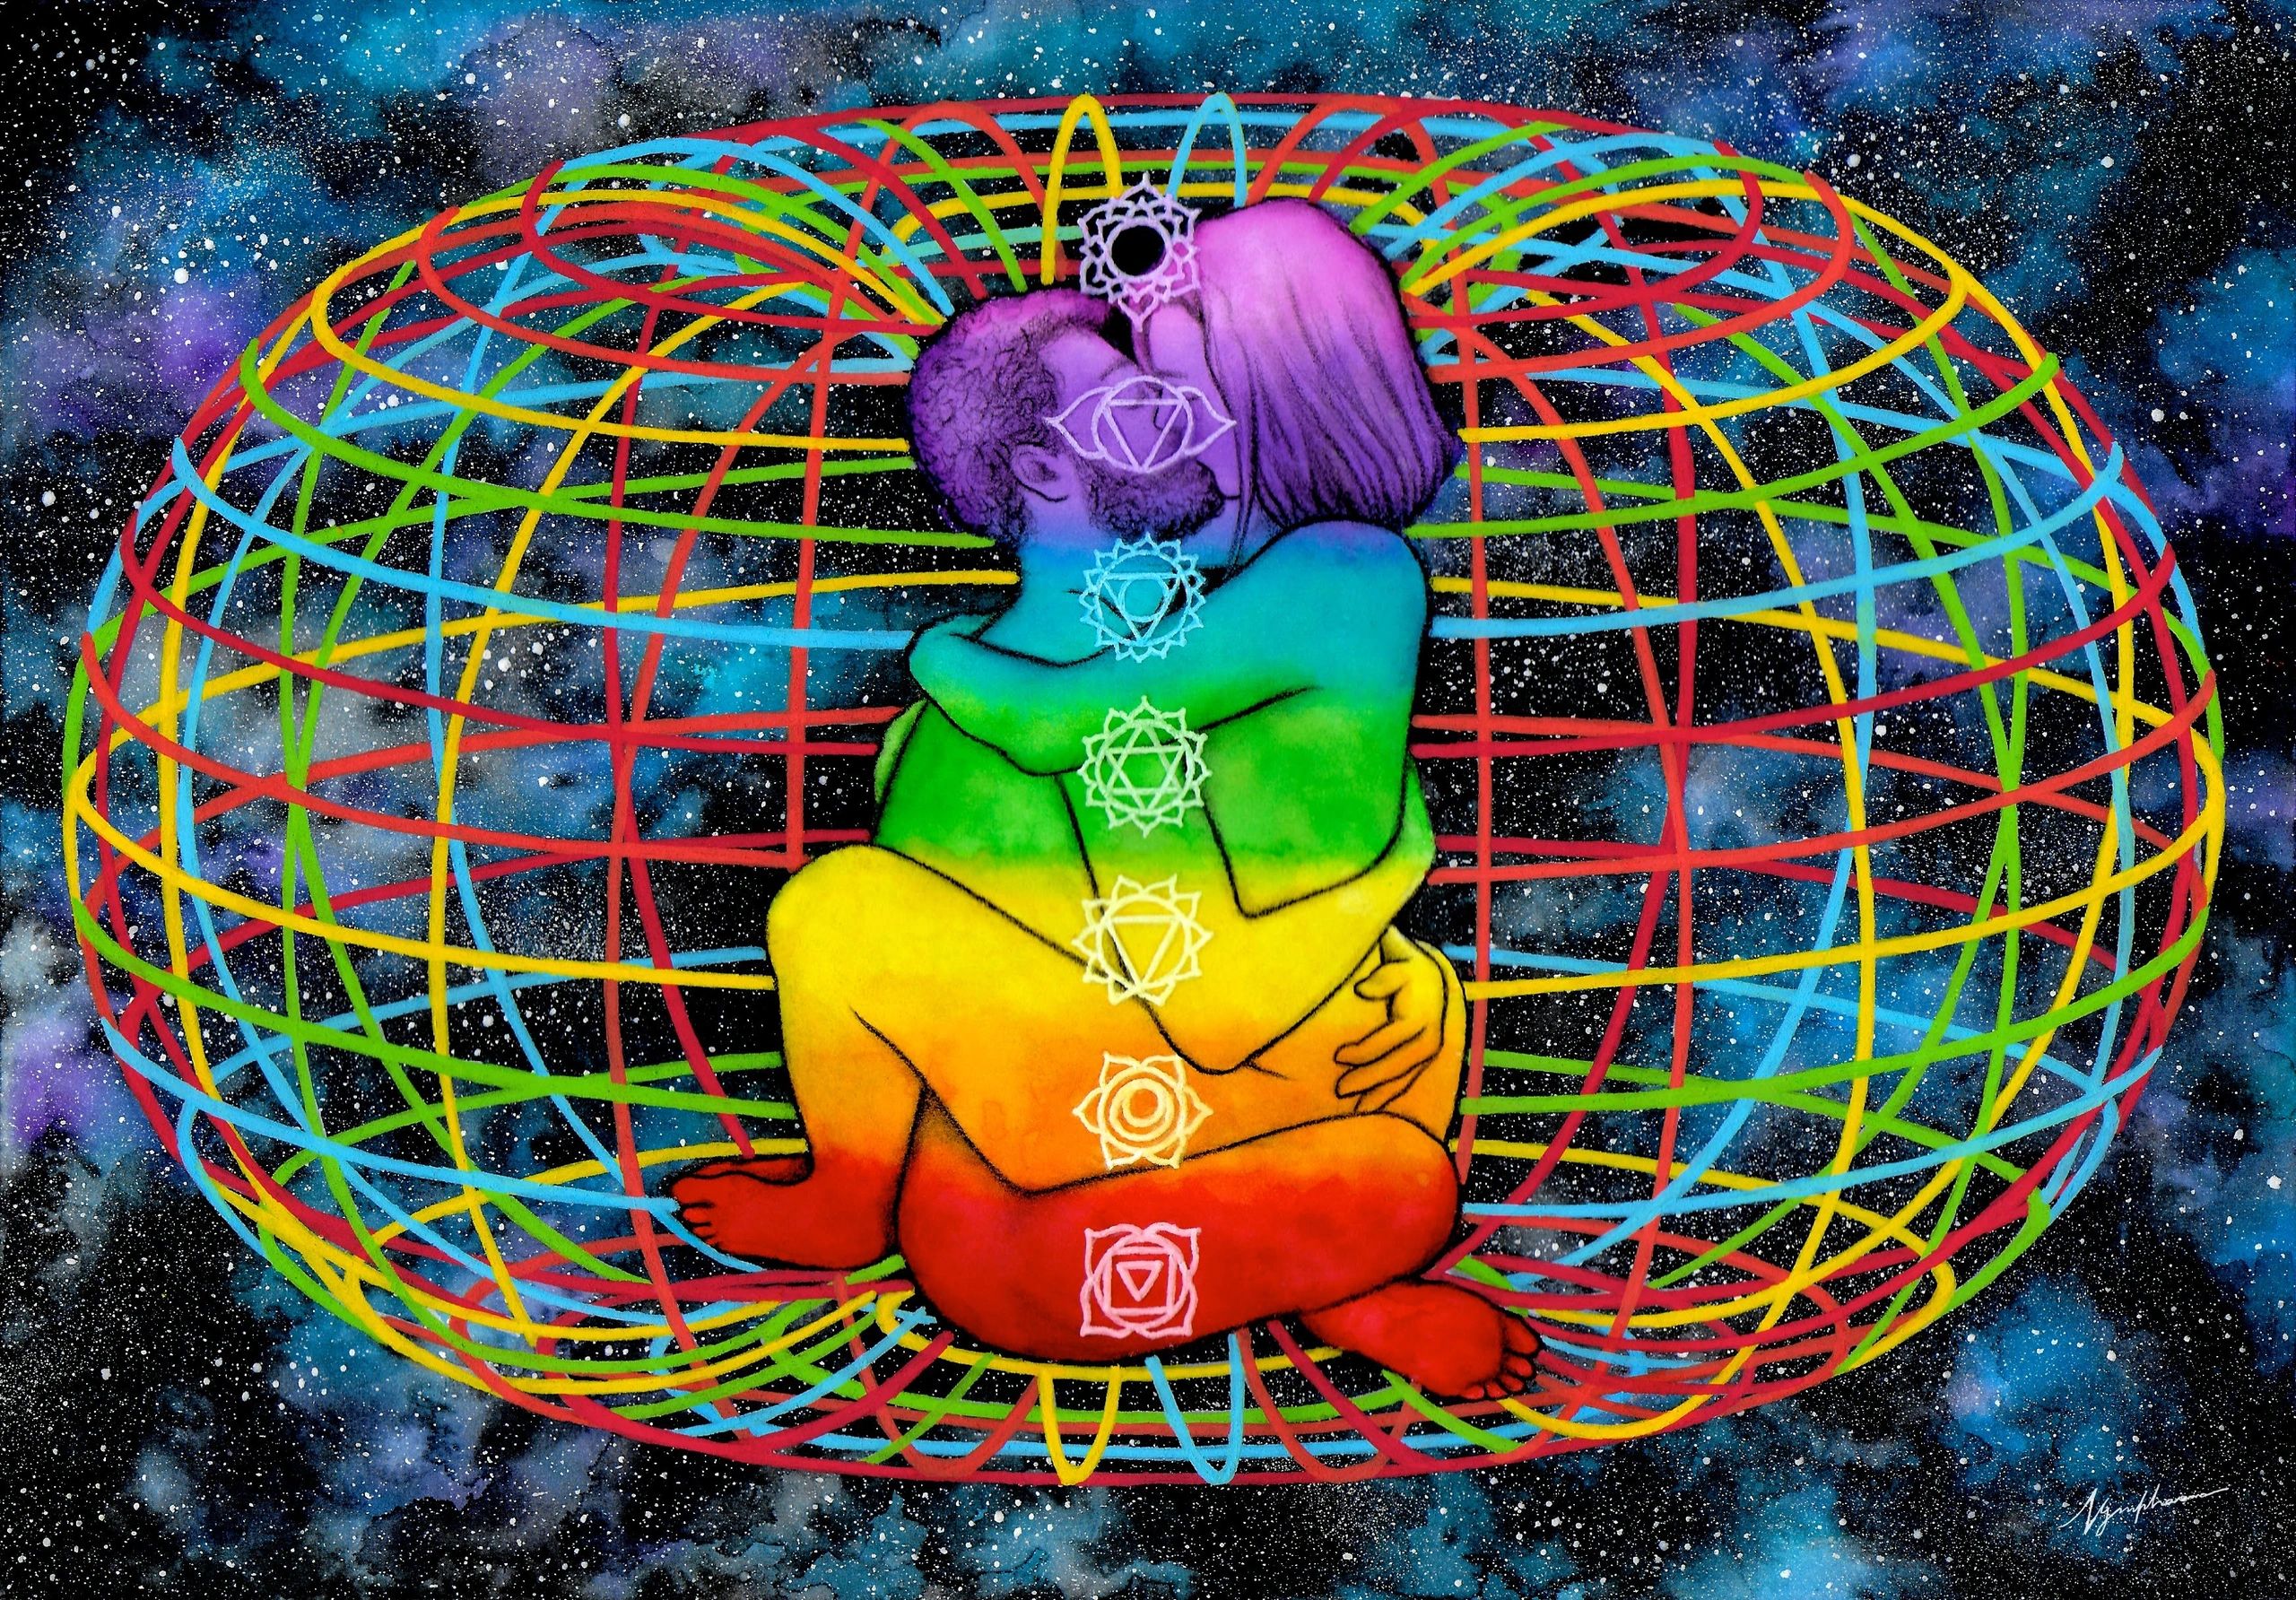 Abstract illustration of couple in tantric embrace with chakra symbols, within astral globe